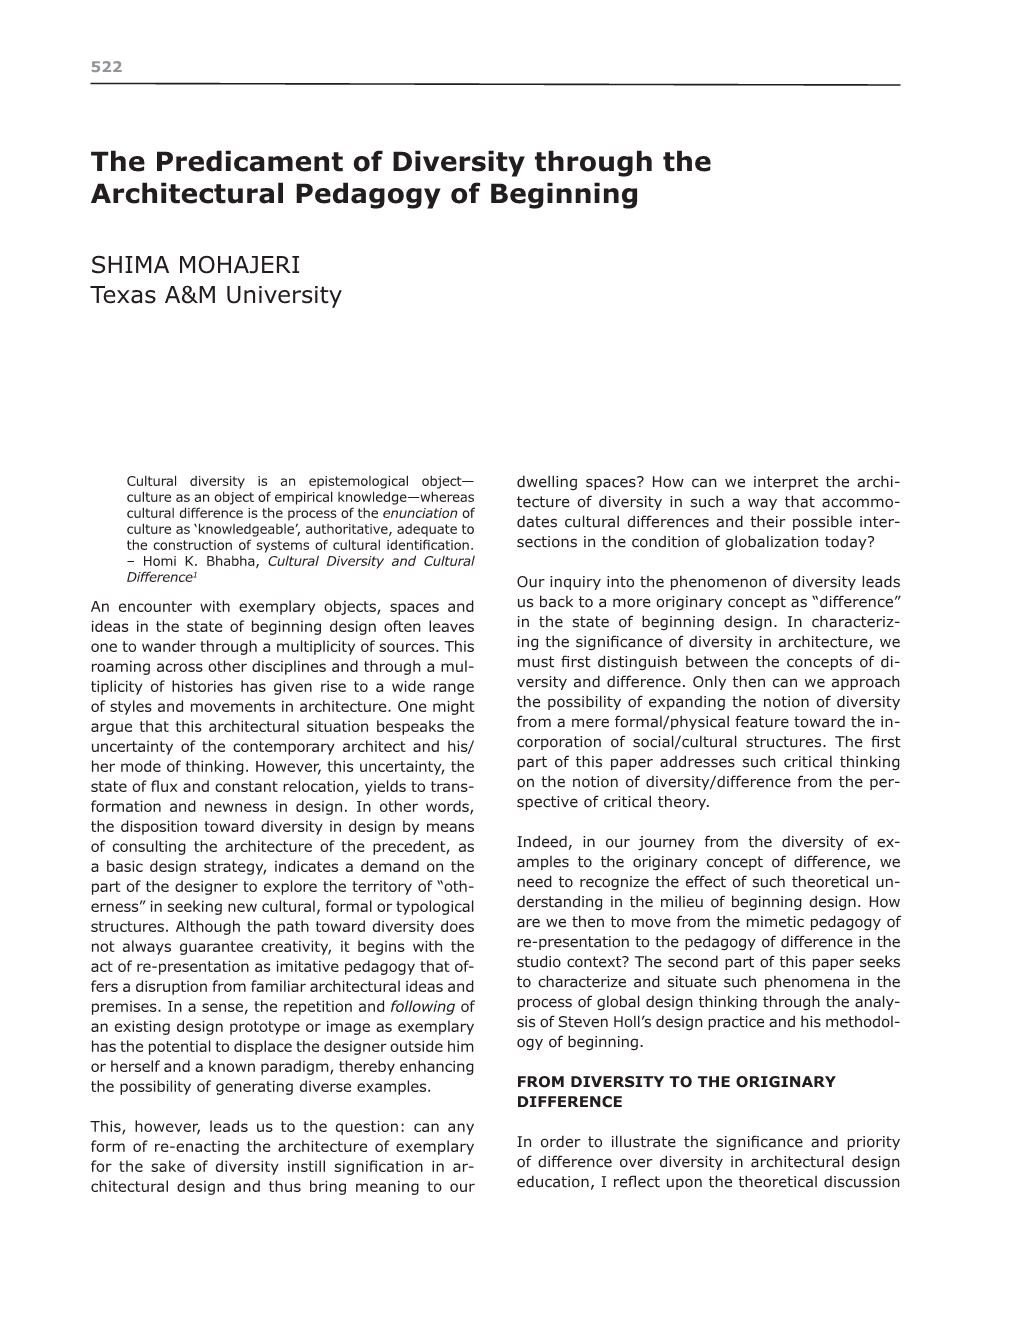 The Predicament of Diversity Through the Architectural Pedagogy of Beginning